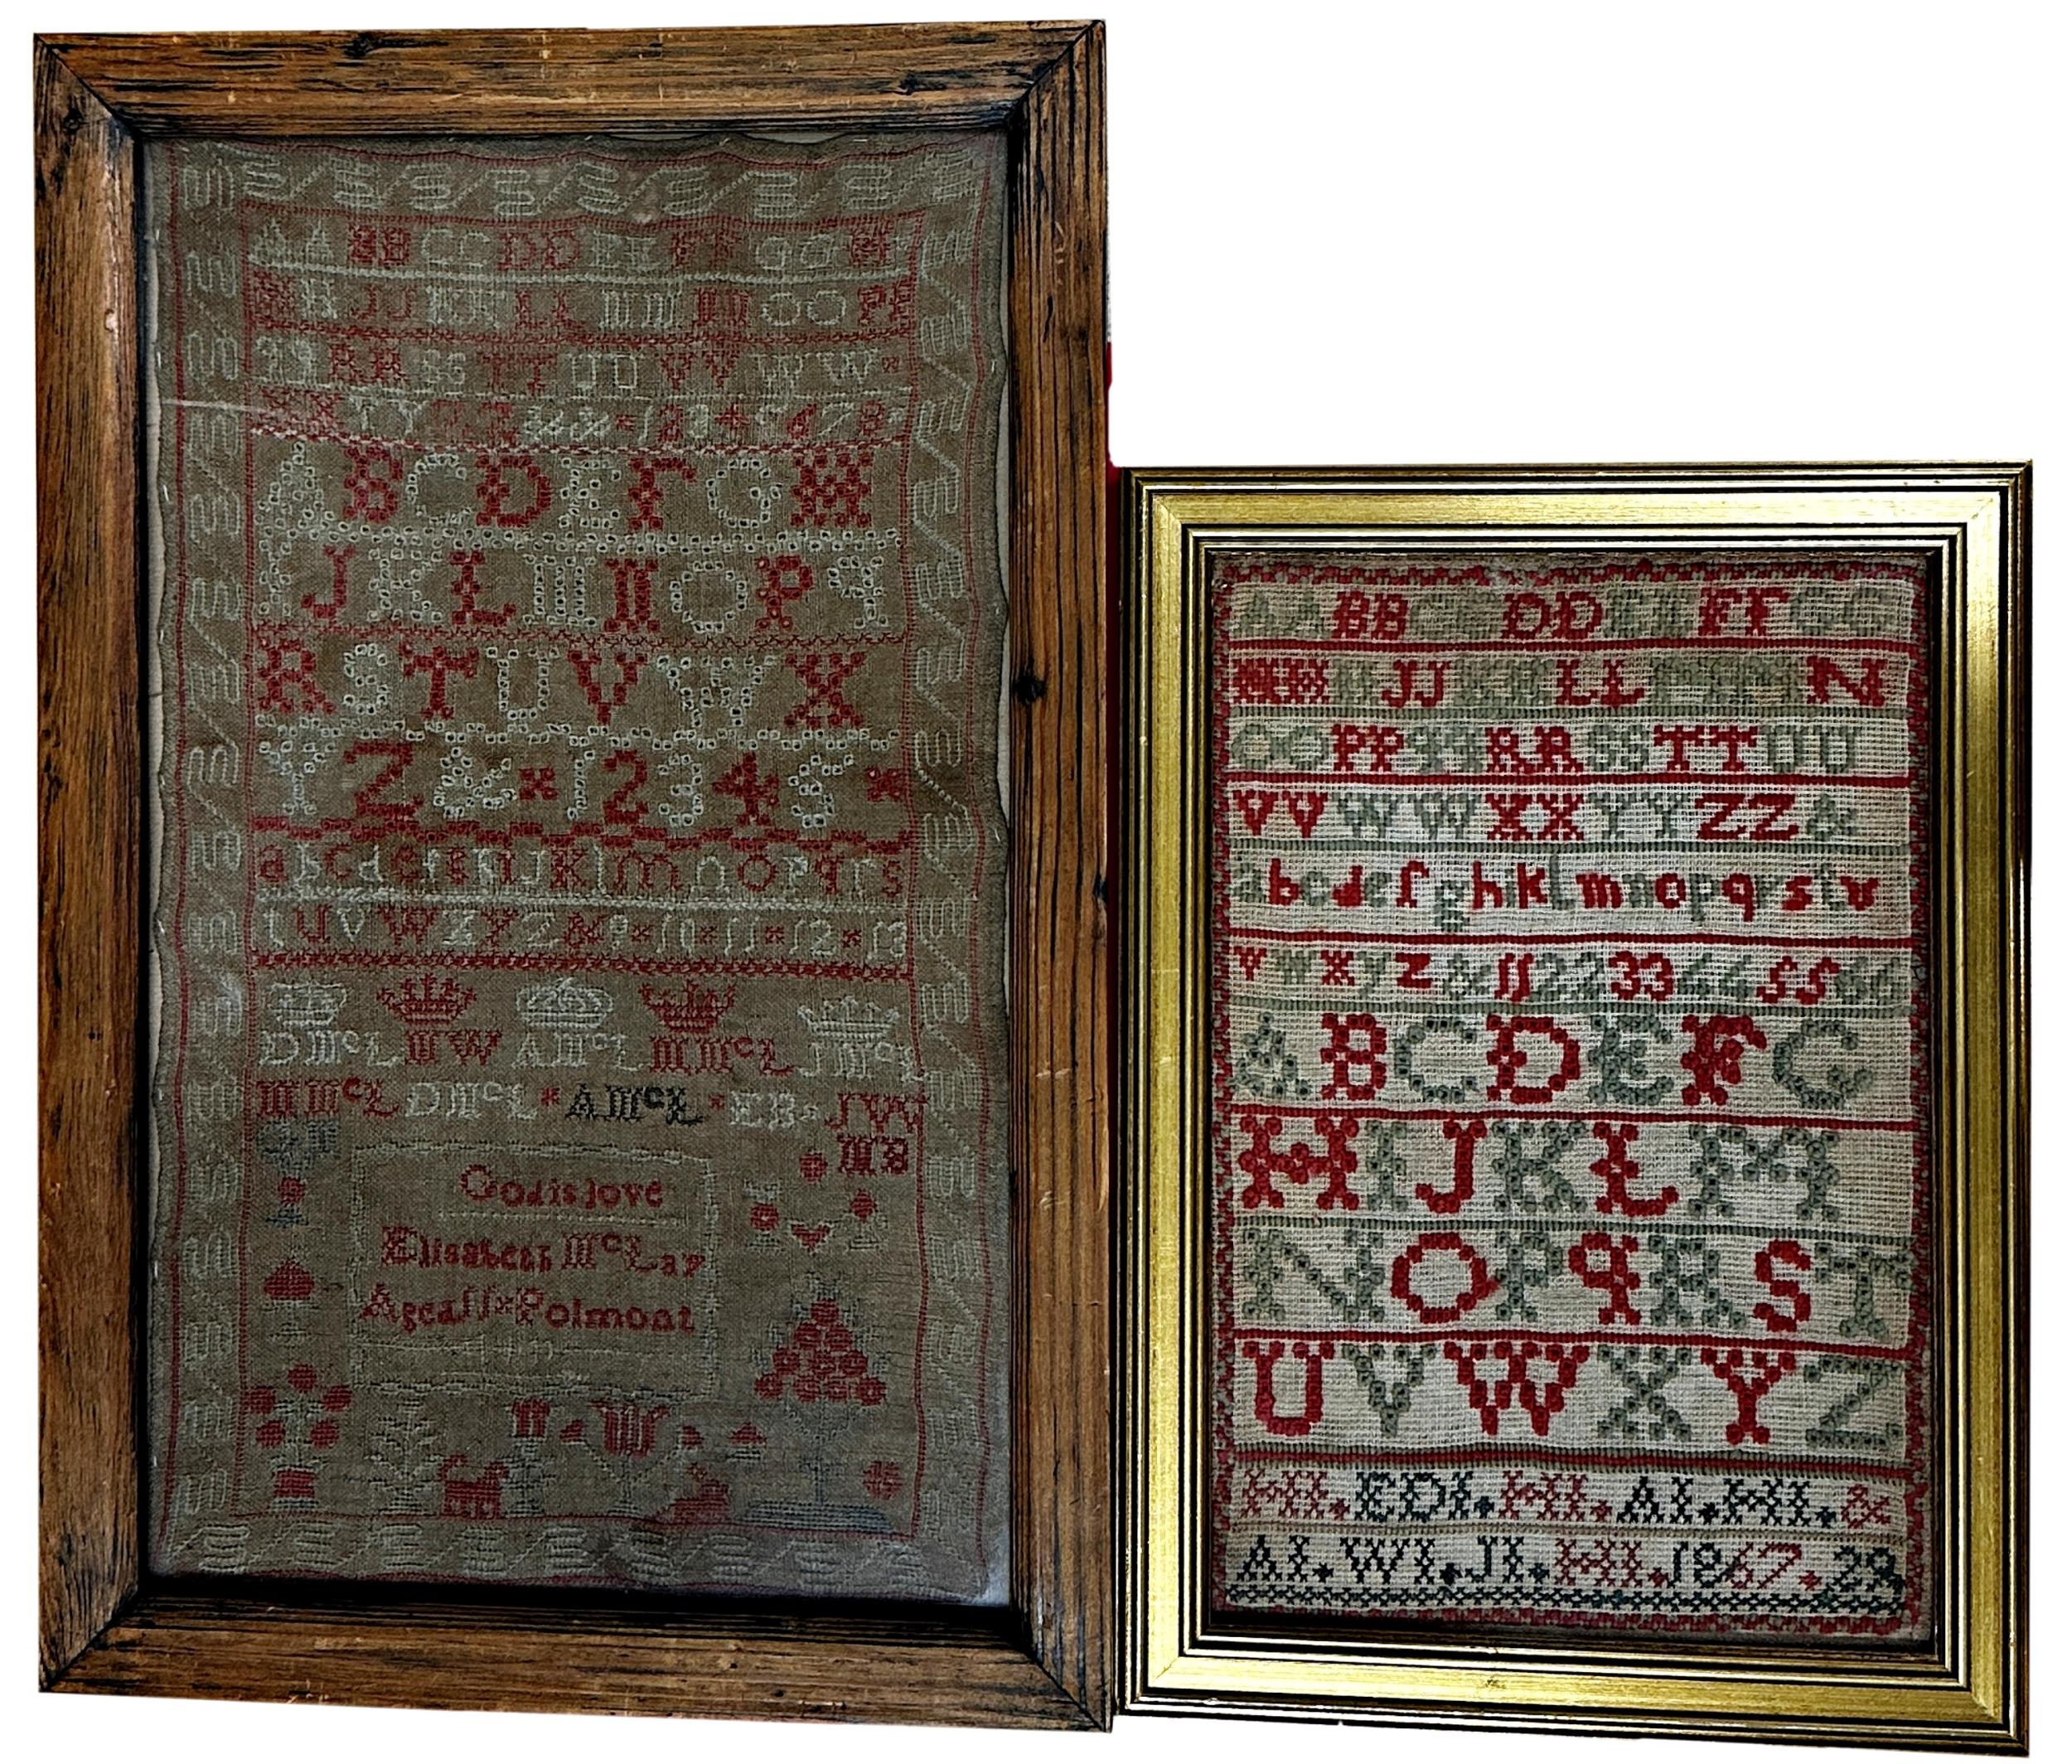 Early 19th century needlework sampler by Elisabeth McLay aged 11, 43 x 26cm, together with a